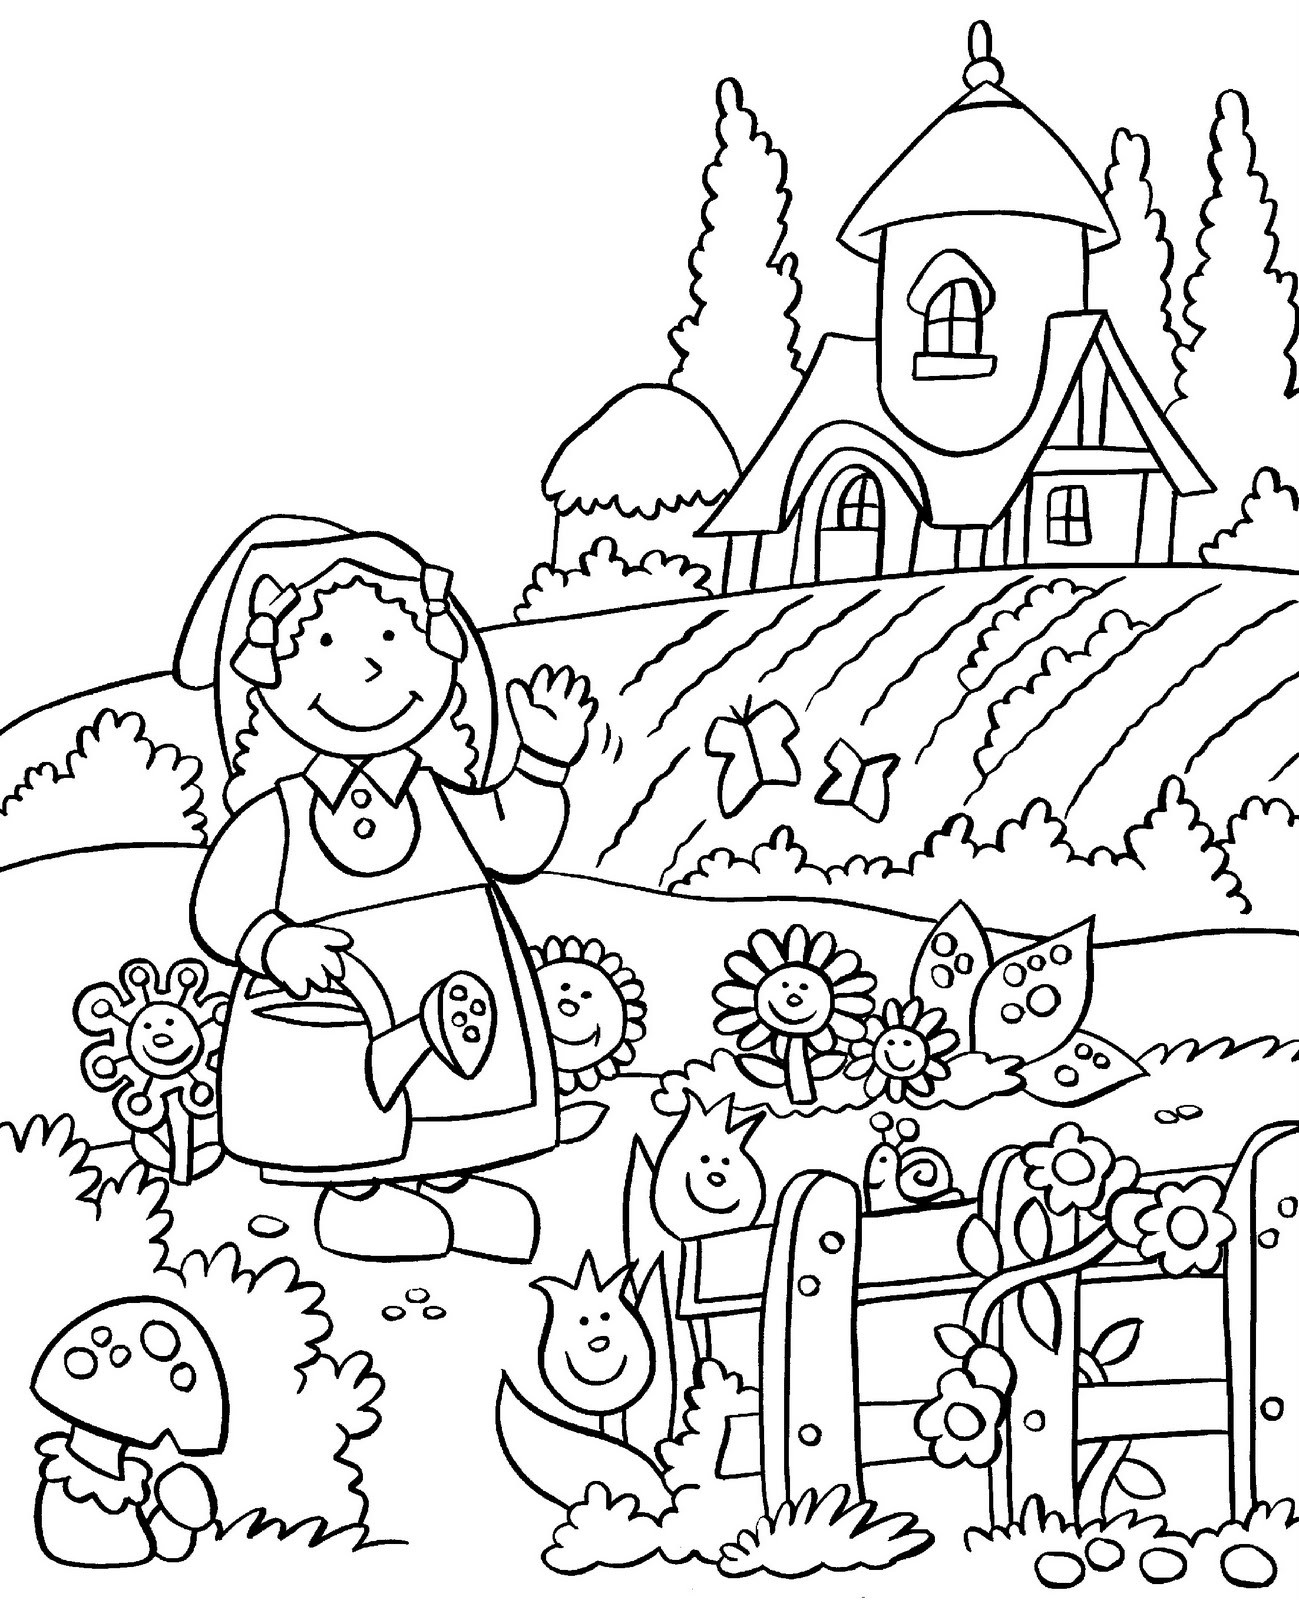 Garden Coloring Pages For Kids
 My Little House Anna and the flower garden coloring pages